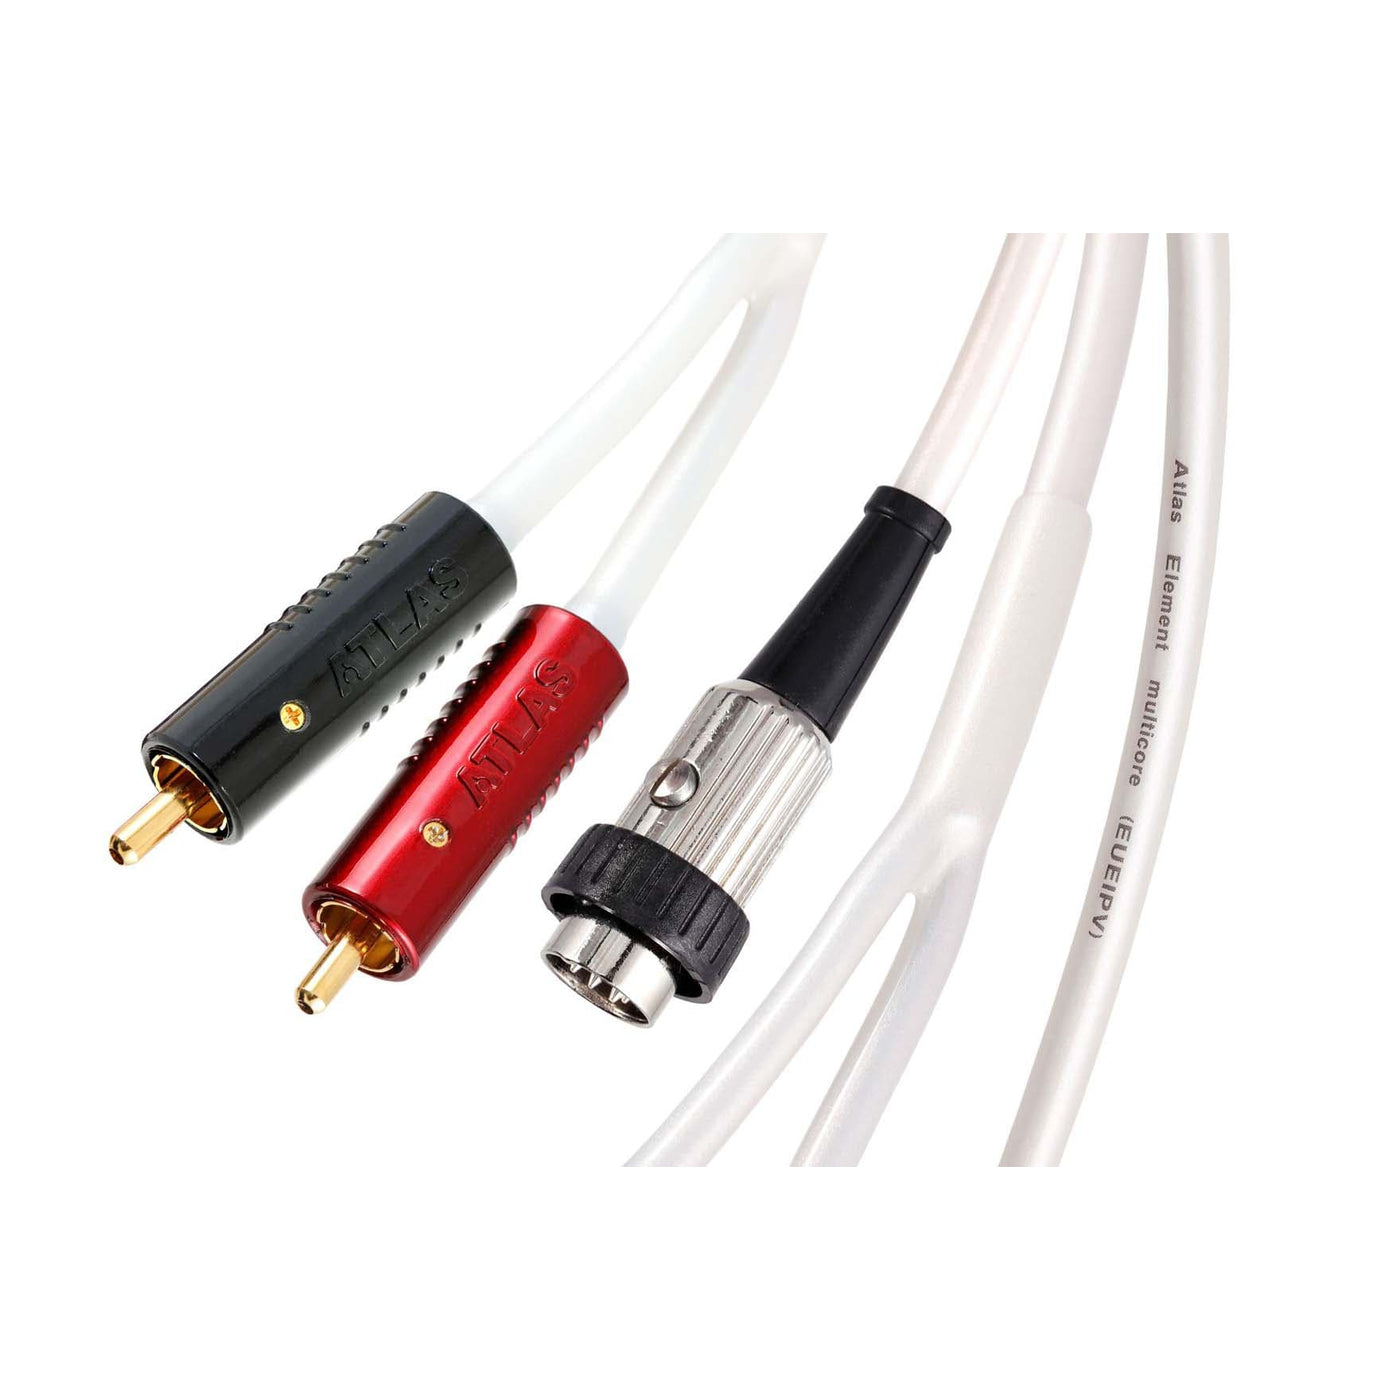 Atlas Element DIN–Achromatic RCA Cable at Audio Influence